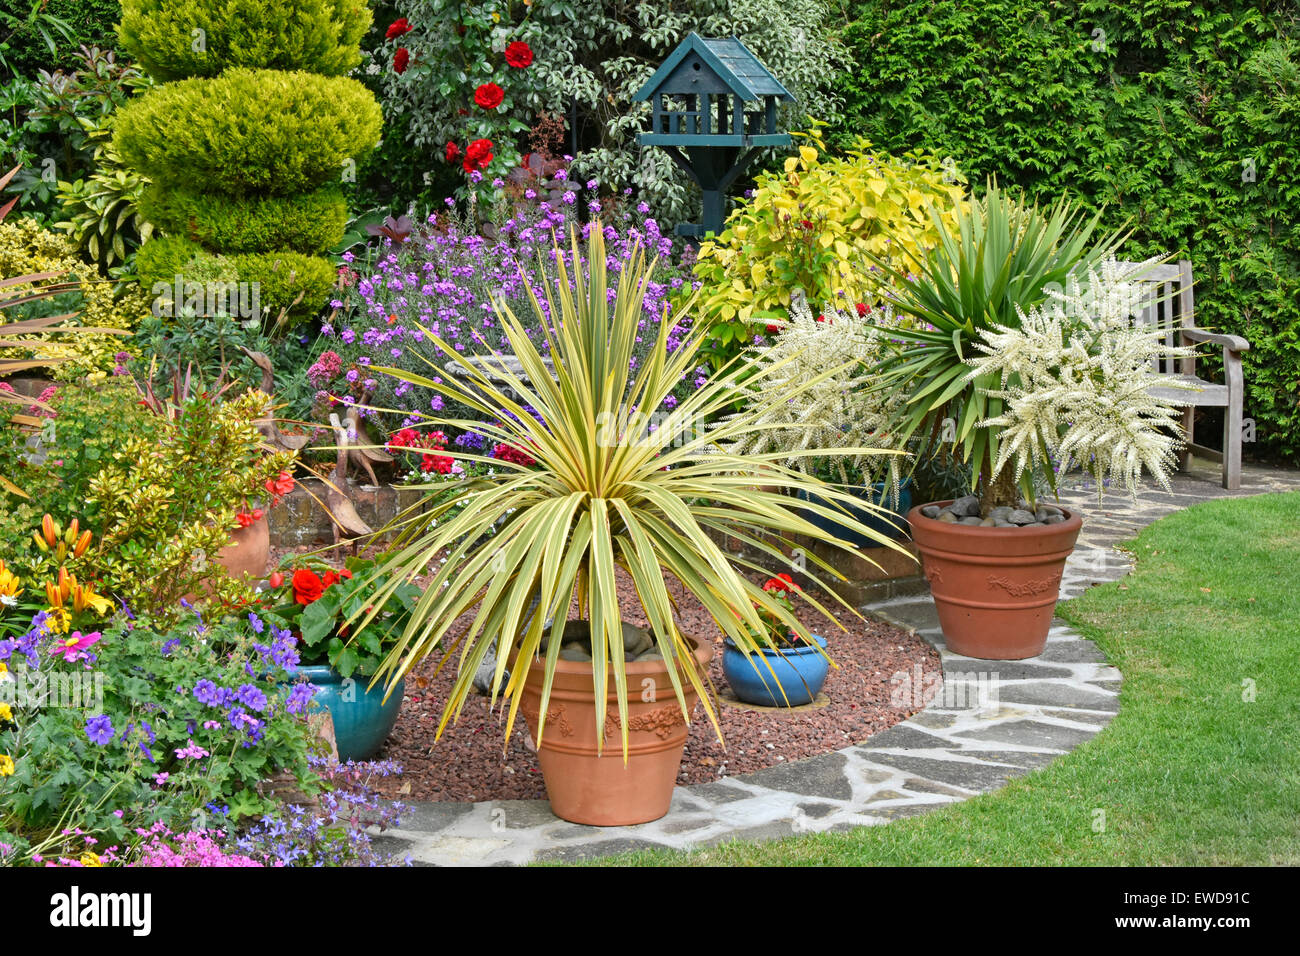 Back garden design mixed plants for colour effect & potted plants for flexible varied arrangements with conifer hedge backdrop summer Essex England UK Stock Photo